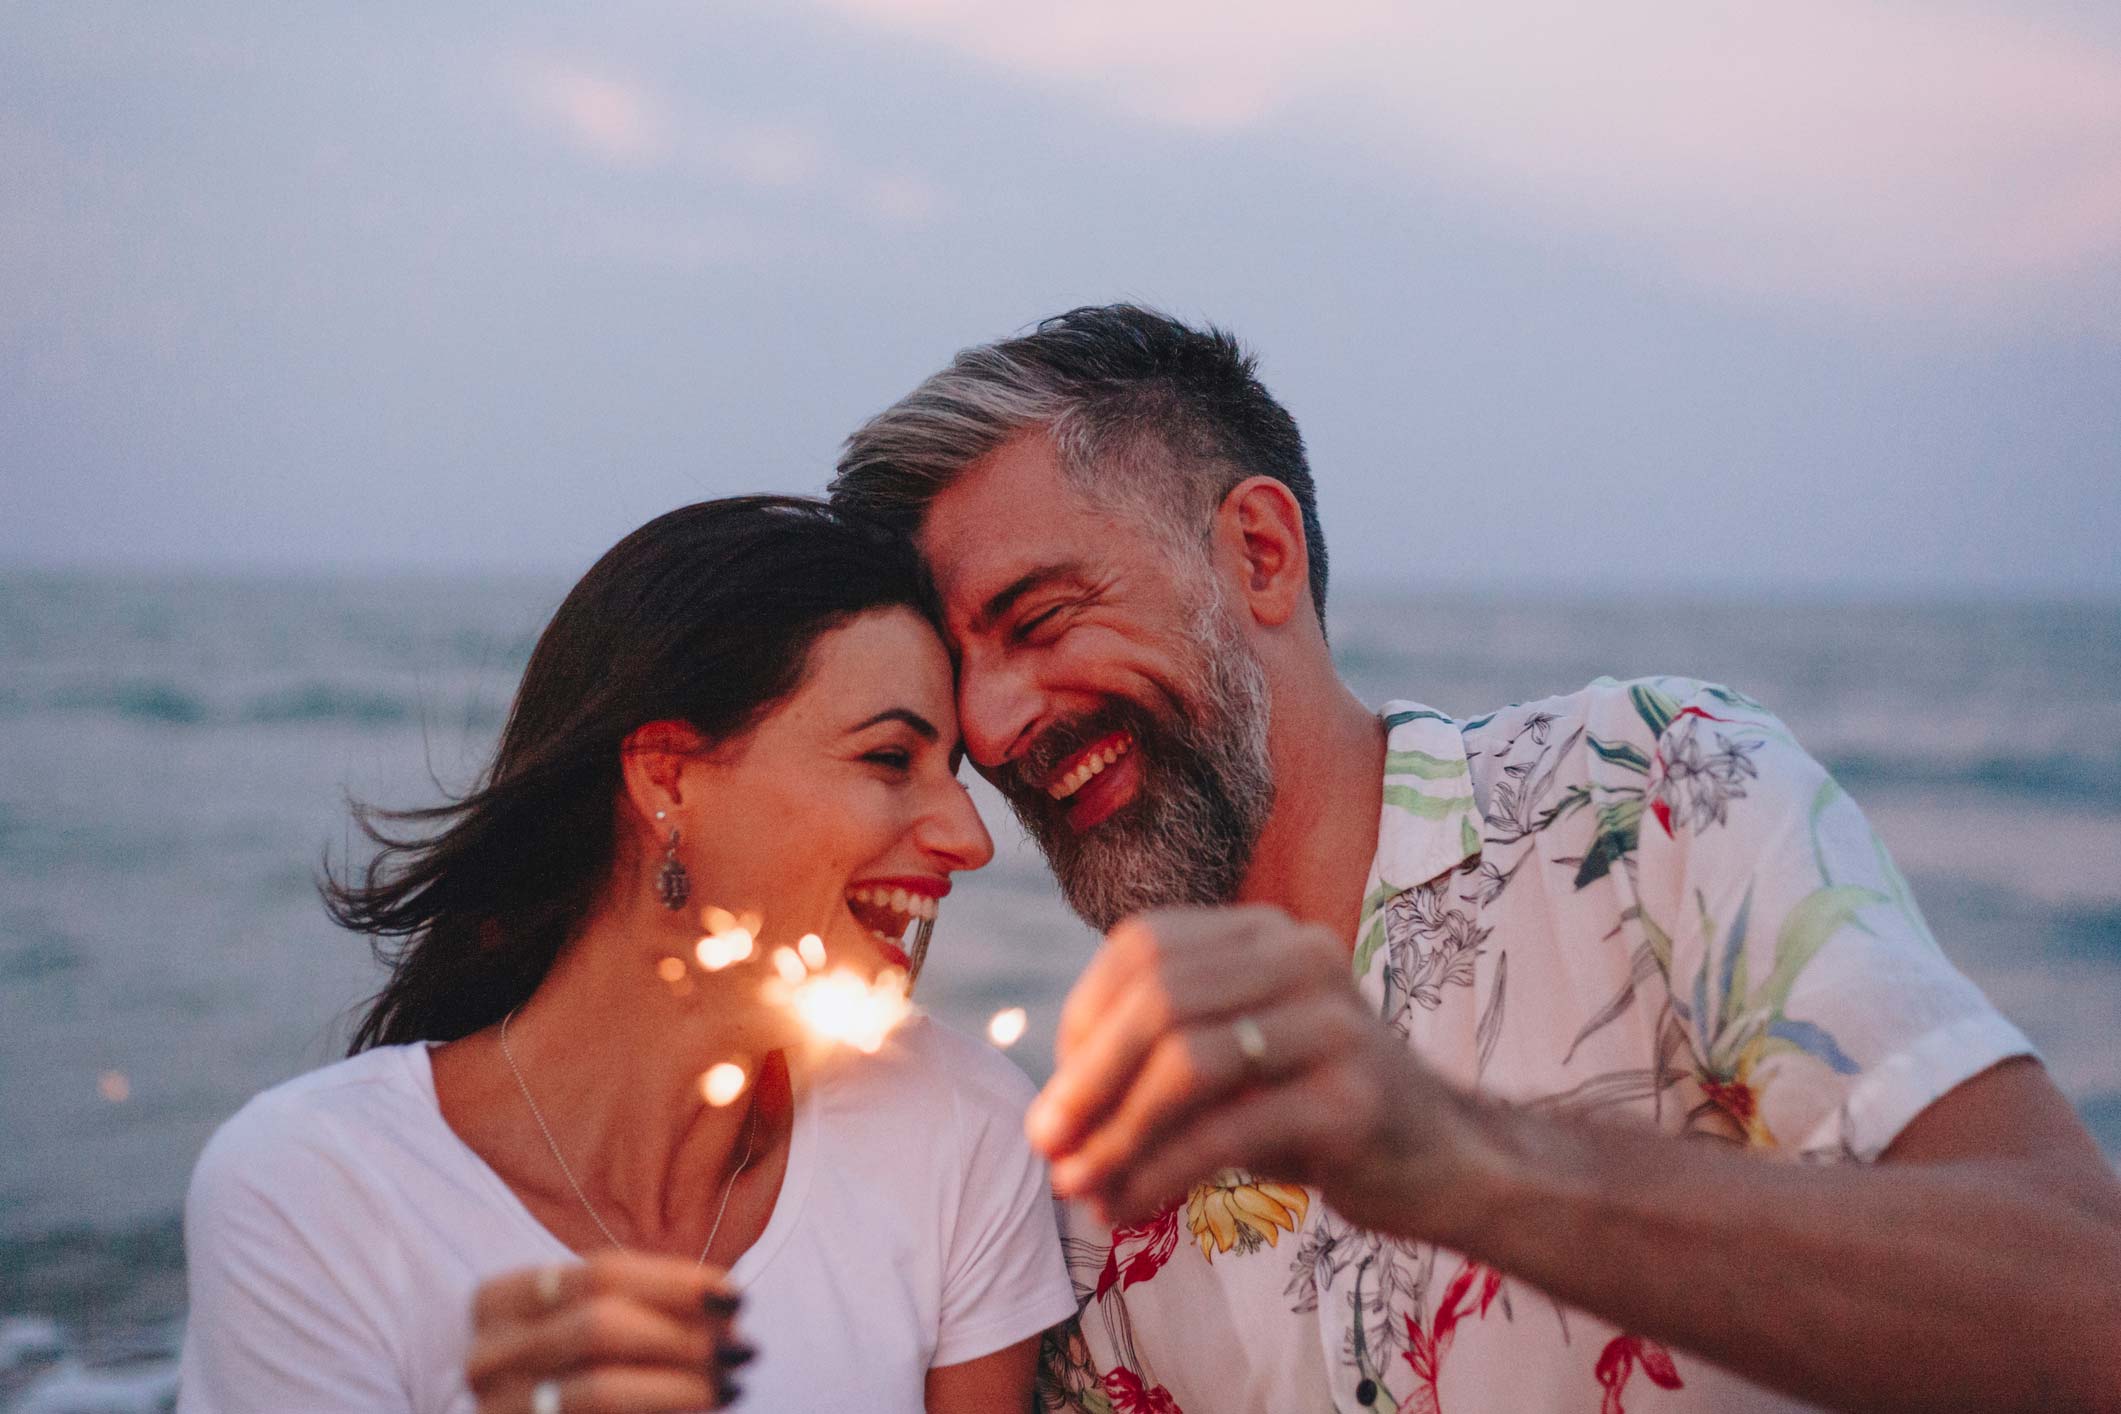 erectile dysfunction clinic, image of a happy couple touching foreheads and holding sparklers with the ocean behind them.